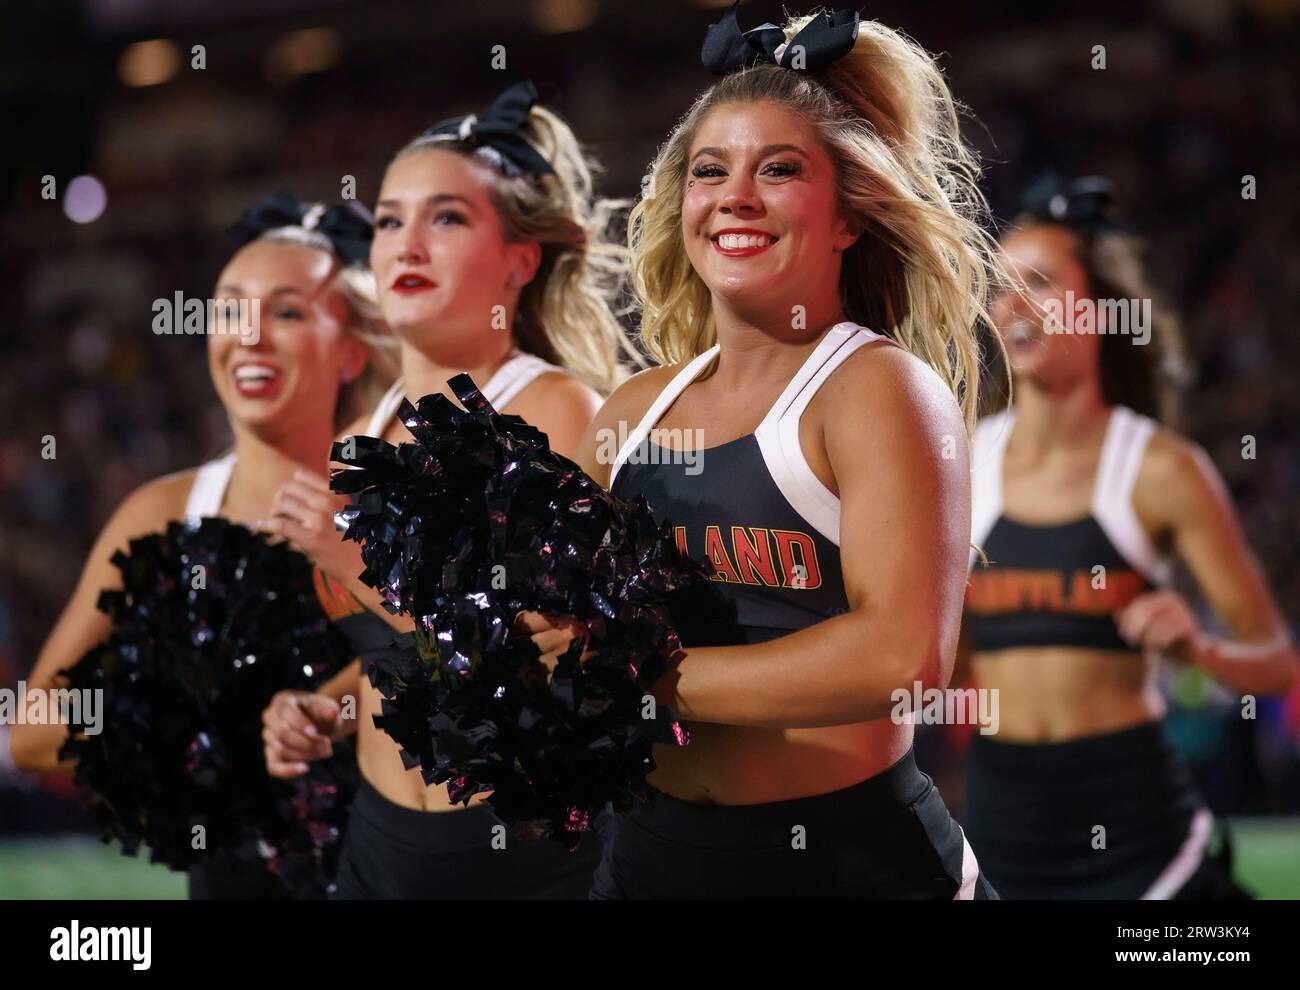 COLLEGE PARK, MARYLAND, USA - 15 SEPTEMBER : Maryland cheerleaders cross the field after a touchdown during a college football game between the Maryland Terrapins and the Virginia Cavaliers on September 15, 2023, at SECU Stadium in College Park, Maryland. (Photo by Tony Quinn-Alamy Live News) Stock Photo